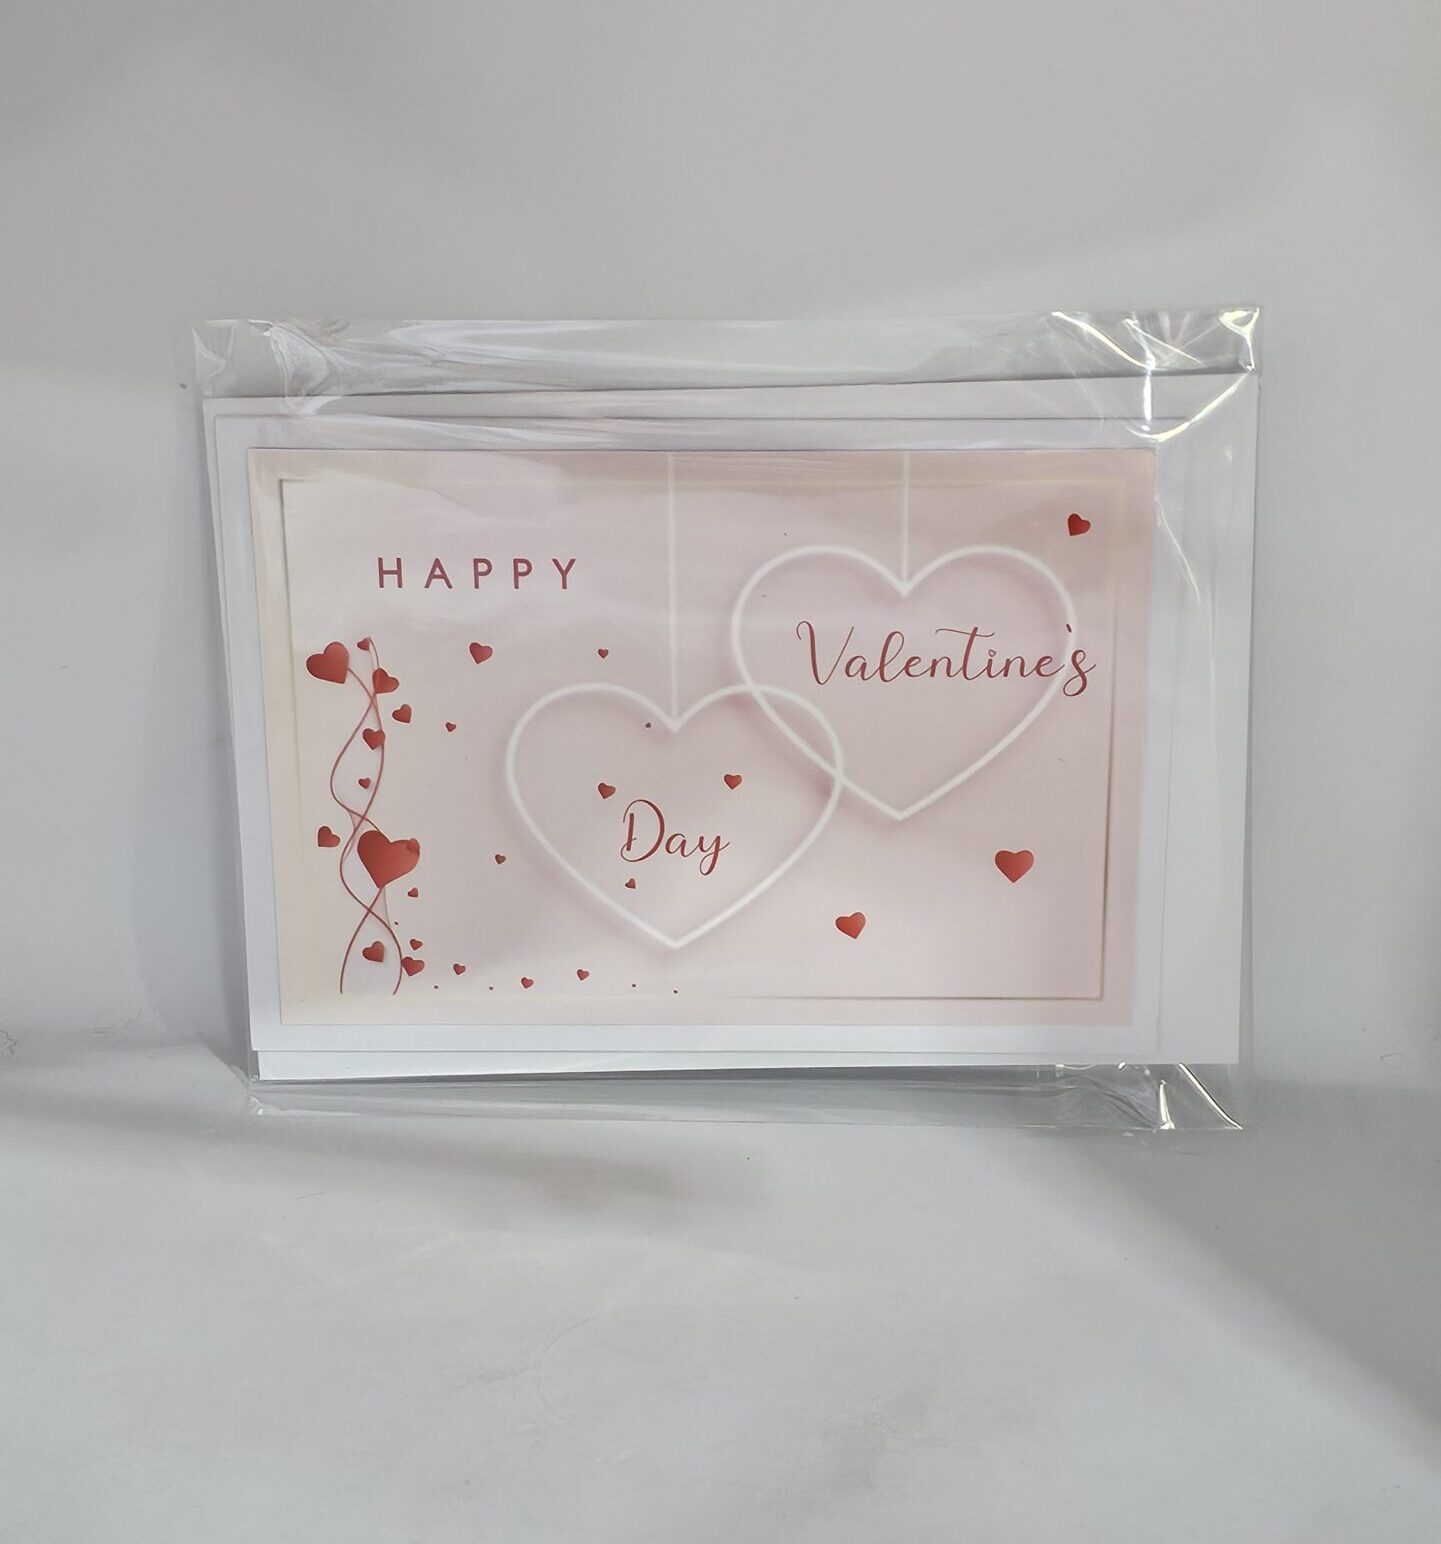 VALENTINE’S DAY 2 HANGING HEARTS GIFT CARD